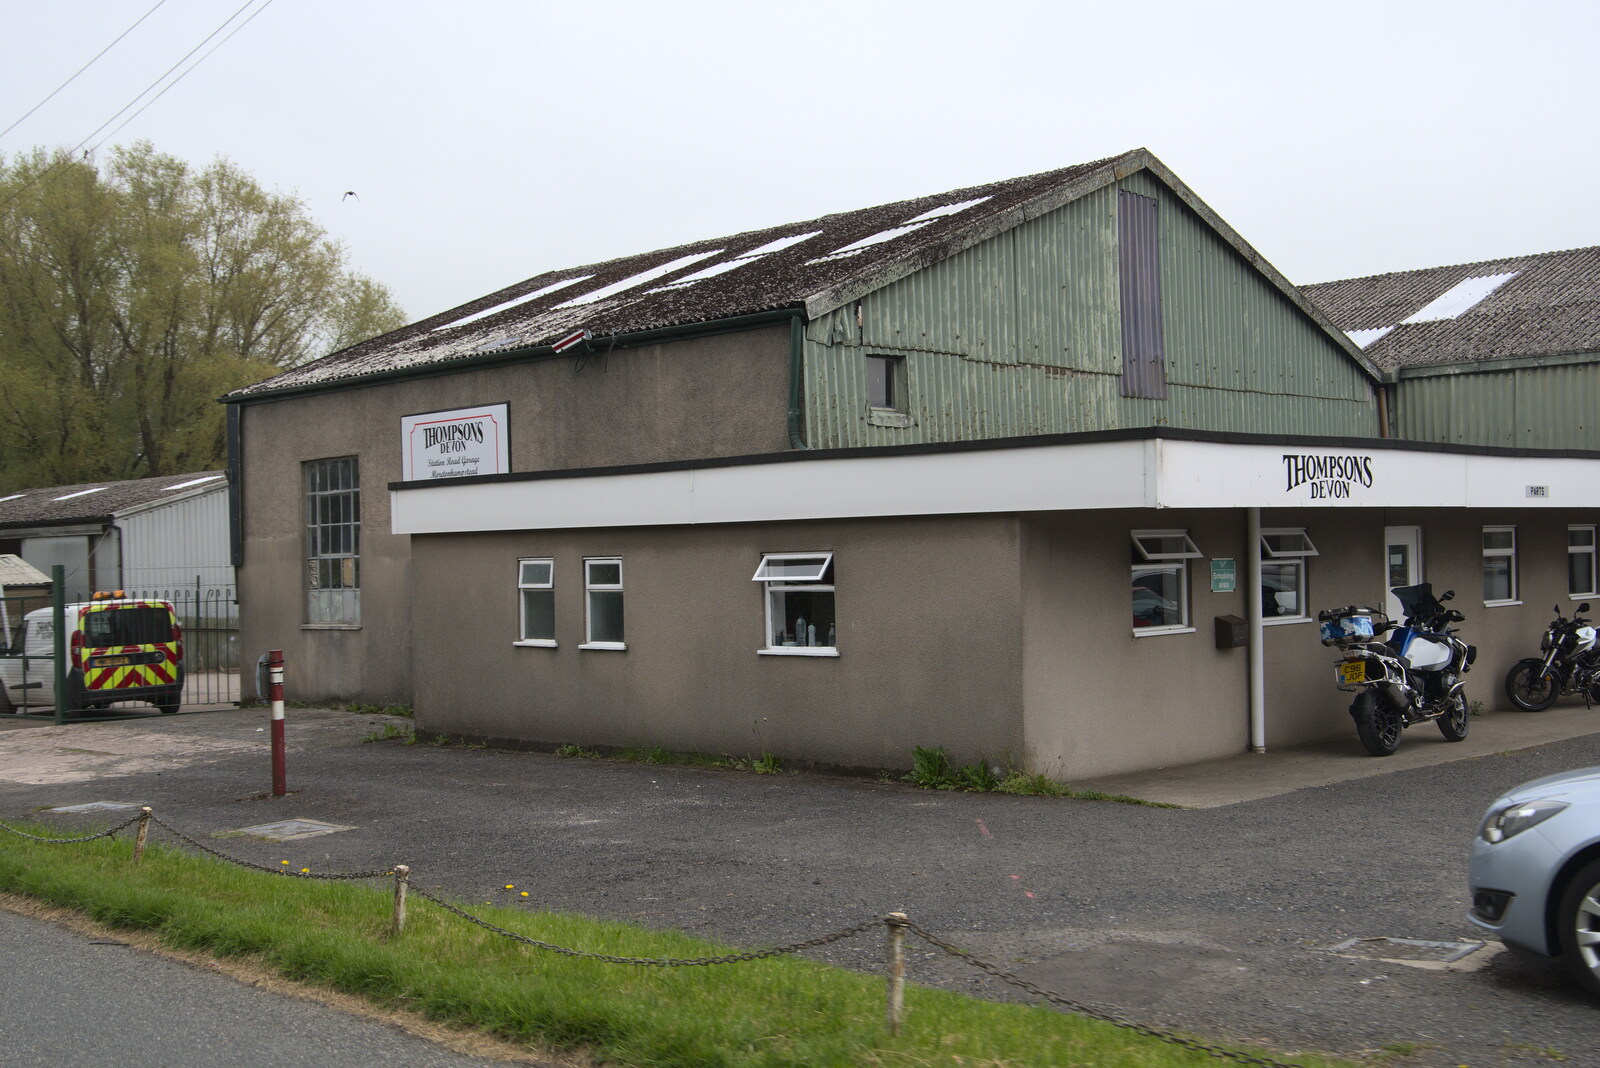 The Thompson's offices and remaining workshops from A Trip to Grandma J's, Spreyton, Devon - 2nd June 2021